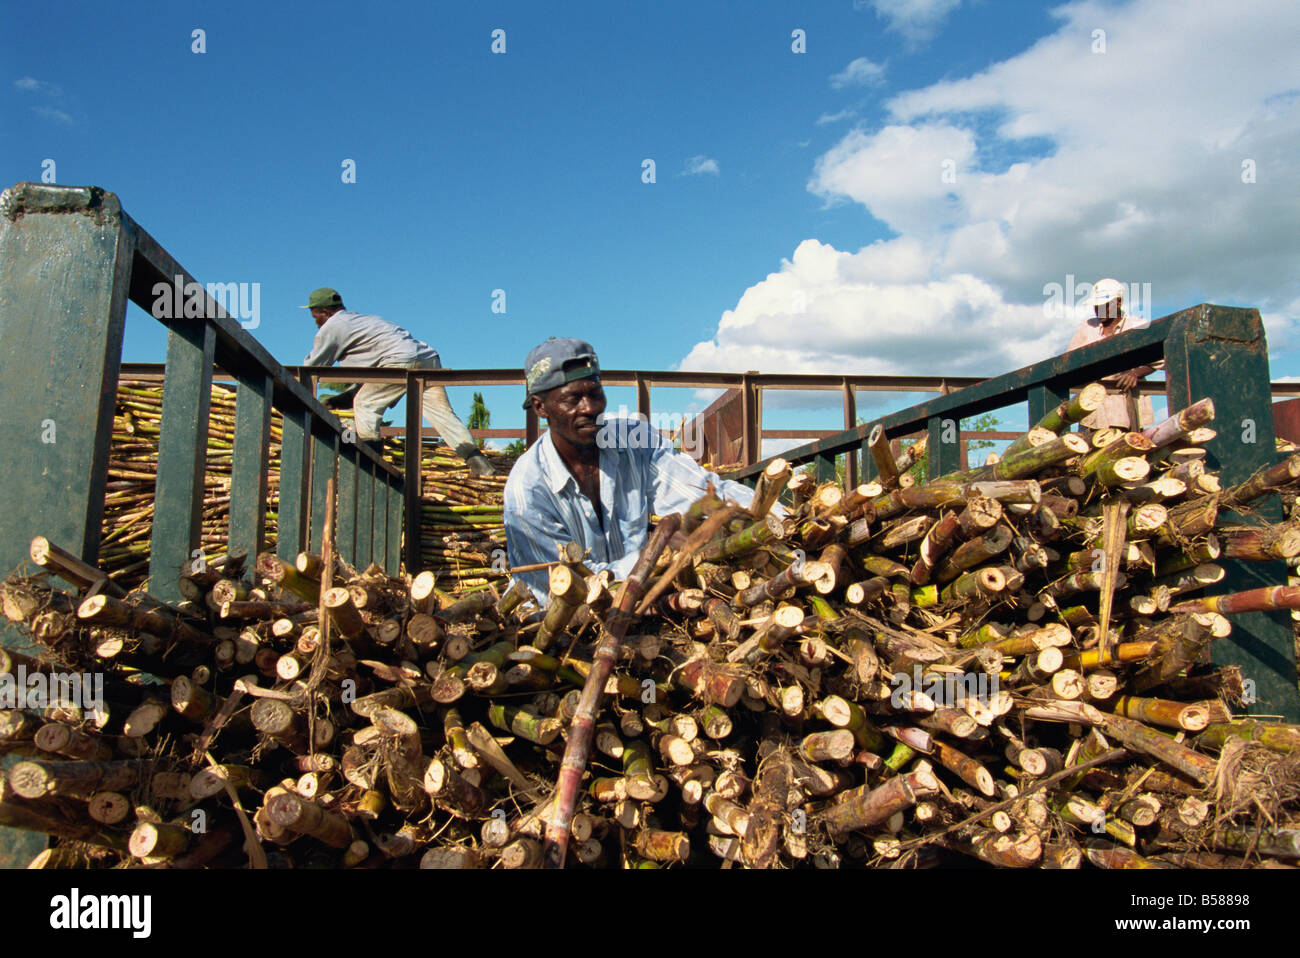 Loading sugar cane, south coast, Dominican Republic, West Indies, Central America Stock Photo